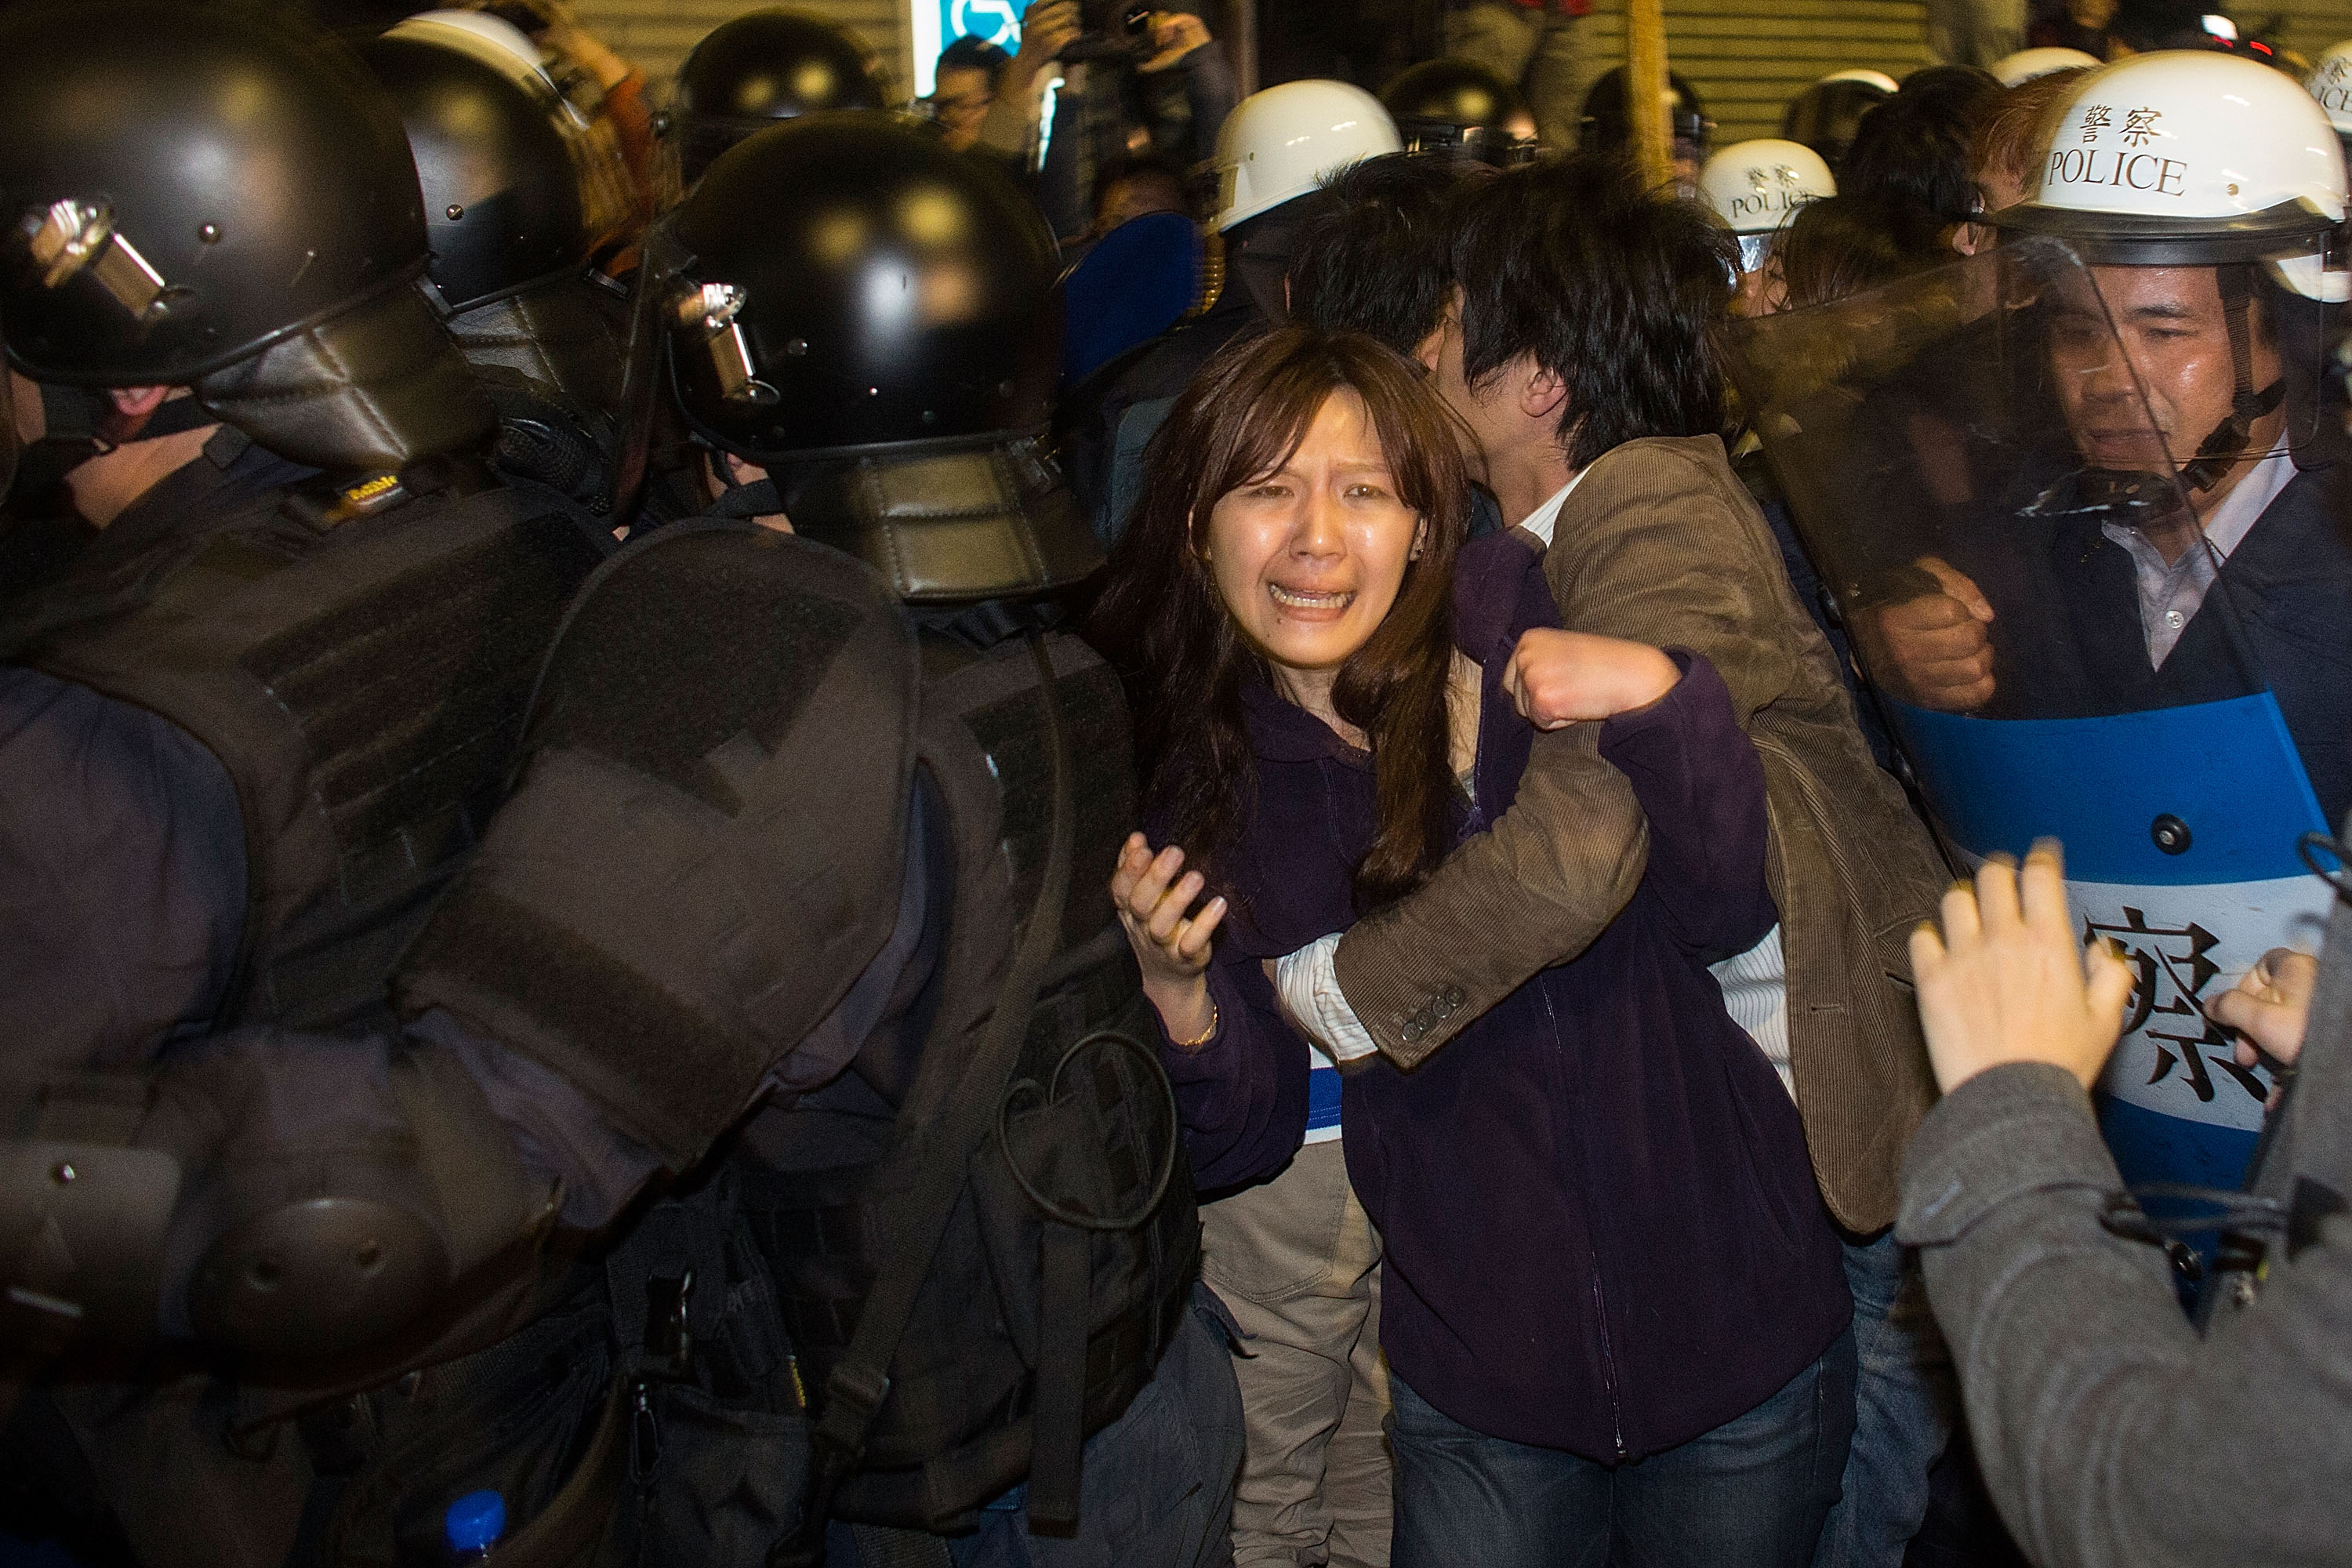 Riot police clash with student protesters outside Taiwan's cabinet offices in Taipei on March 24, 2014. Clashes erupted after Taiwan's President refused to scrap a contentious trade agreement with China and denounced the "illegal" occupation of government buildings by students opposed to its ratification (Lam Yik Fei&mdash;Getty Images)